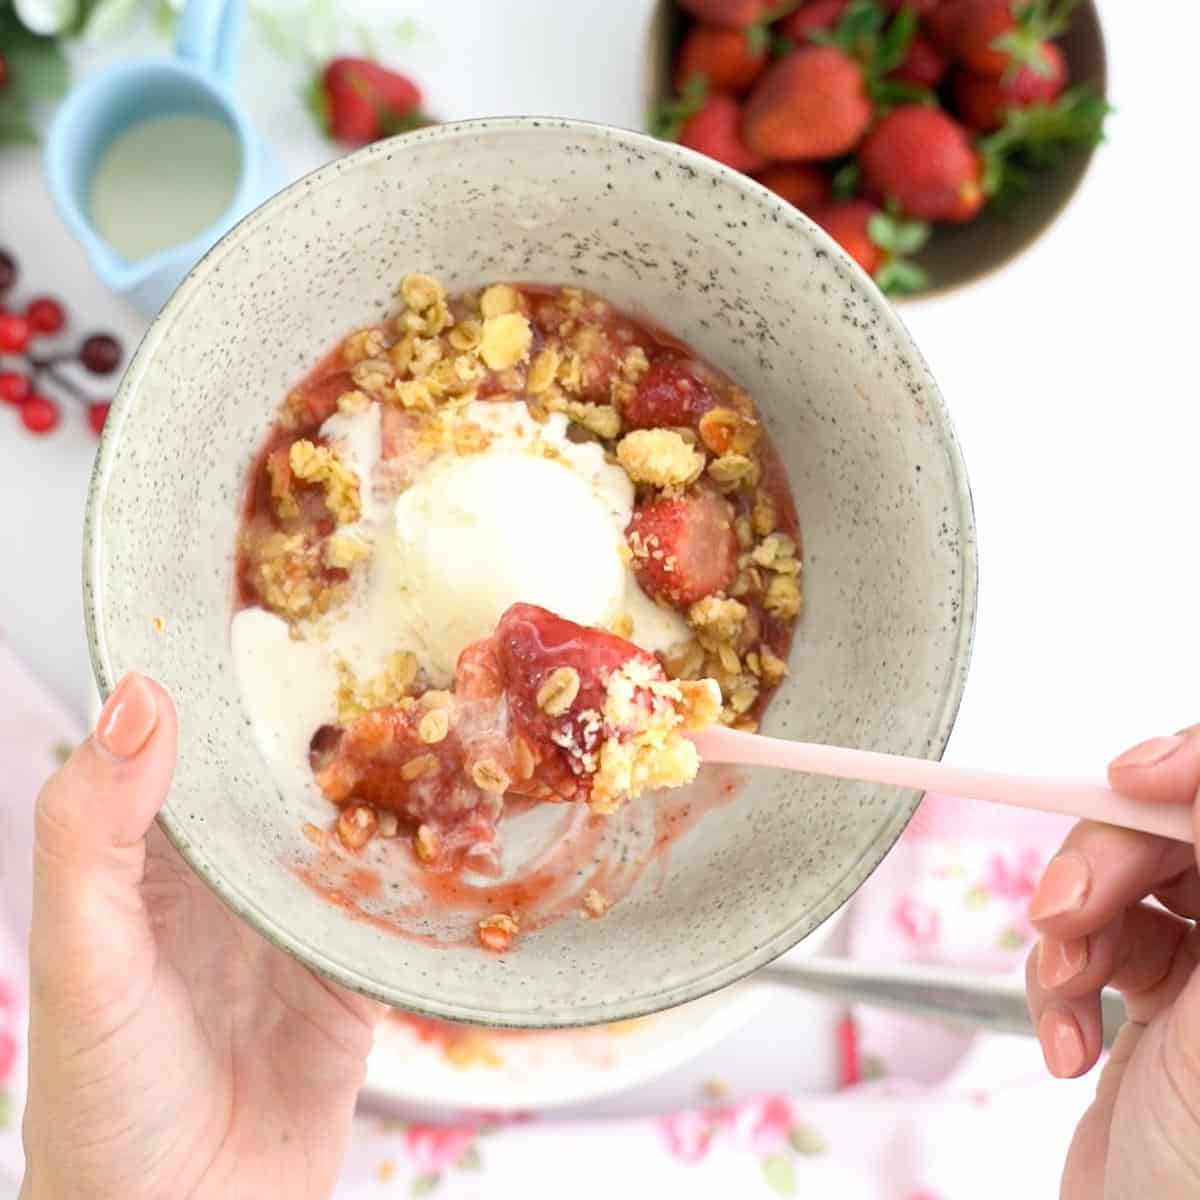 A bowl full of stewed strawberries and crumble topping with vanilla ice cream. 